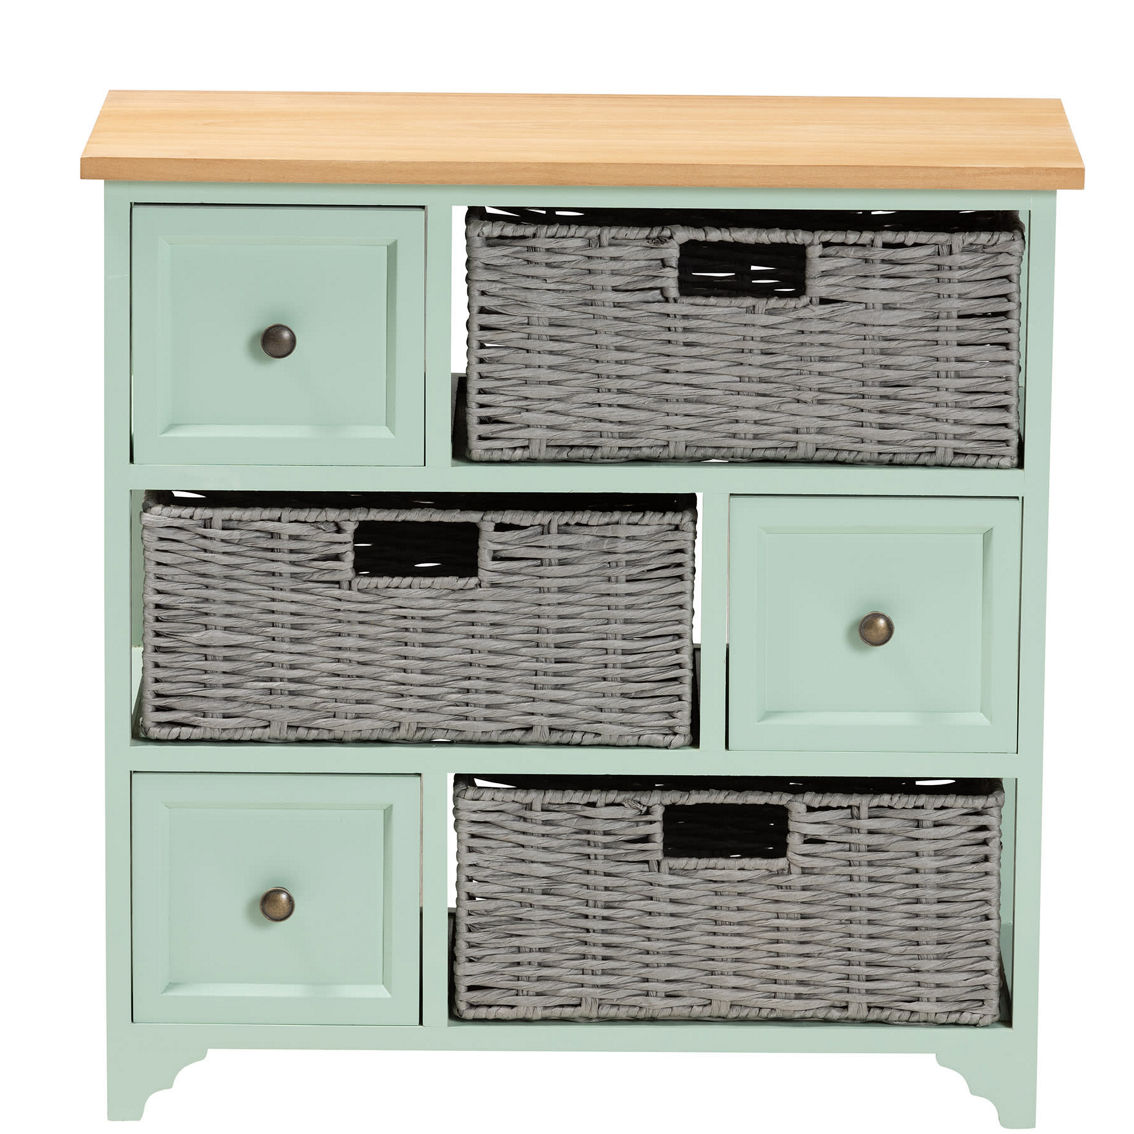 Baxton Studio Valtina Oak Brown and Mint Green 3-Drawer Storage Unit with Baskets - Image 3 of 5